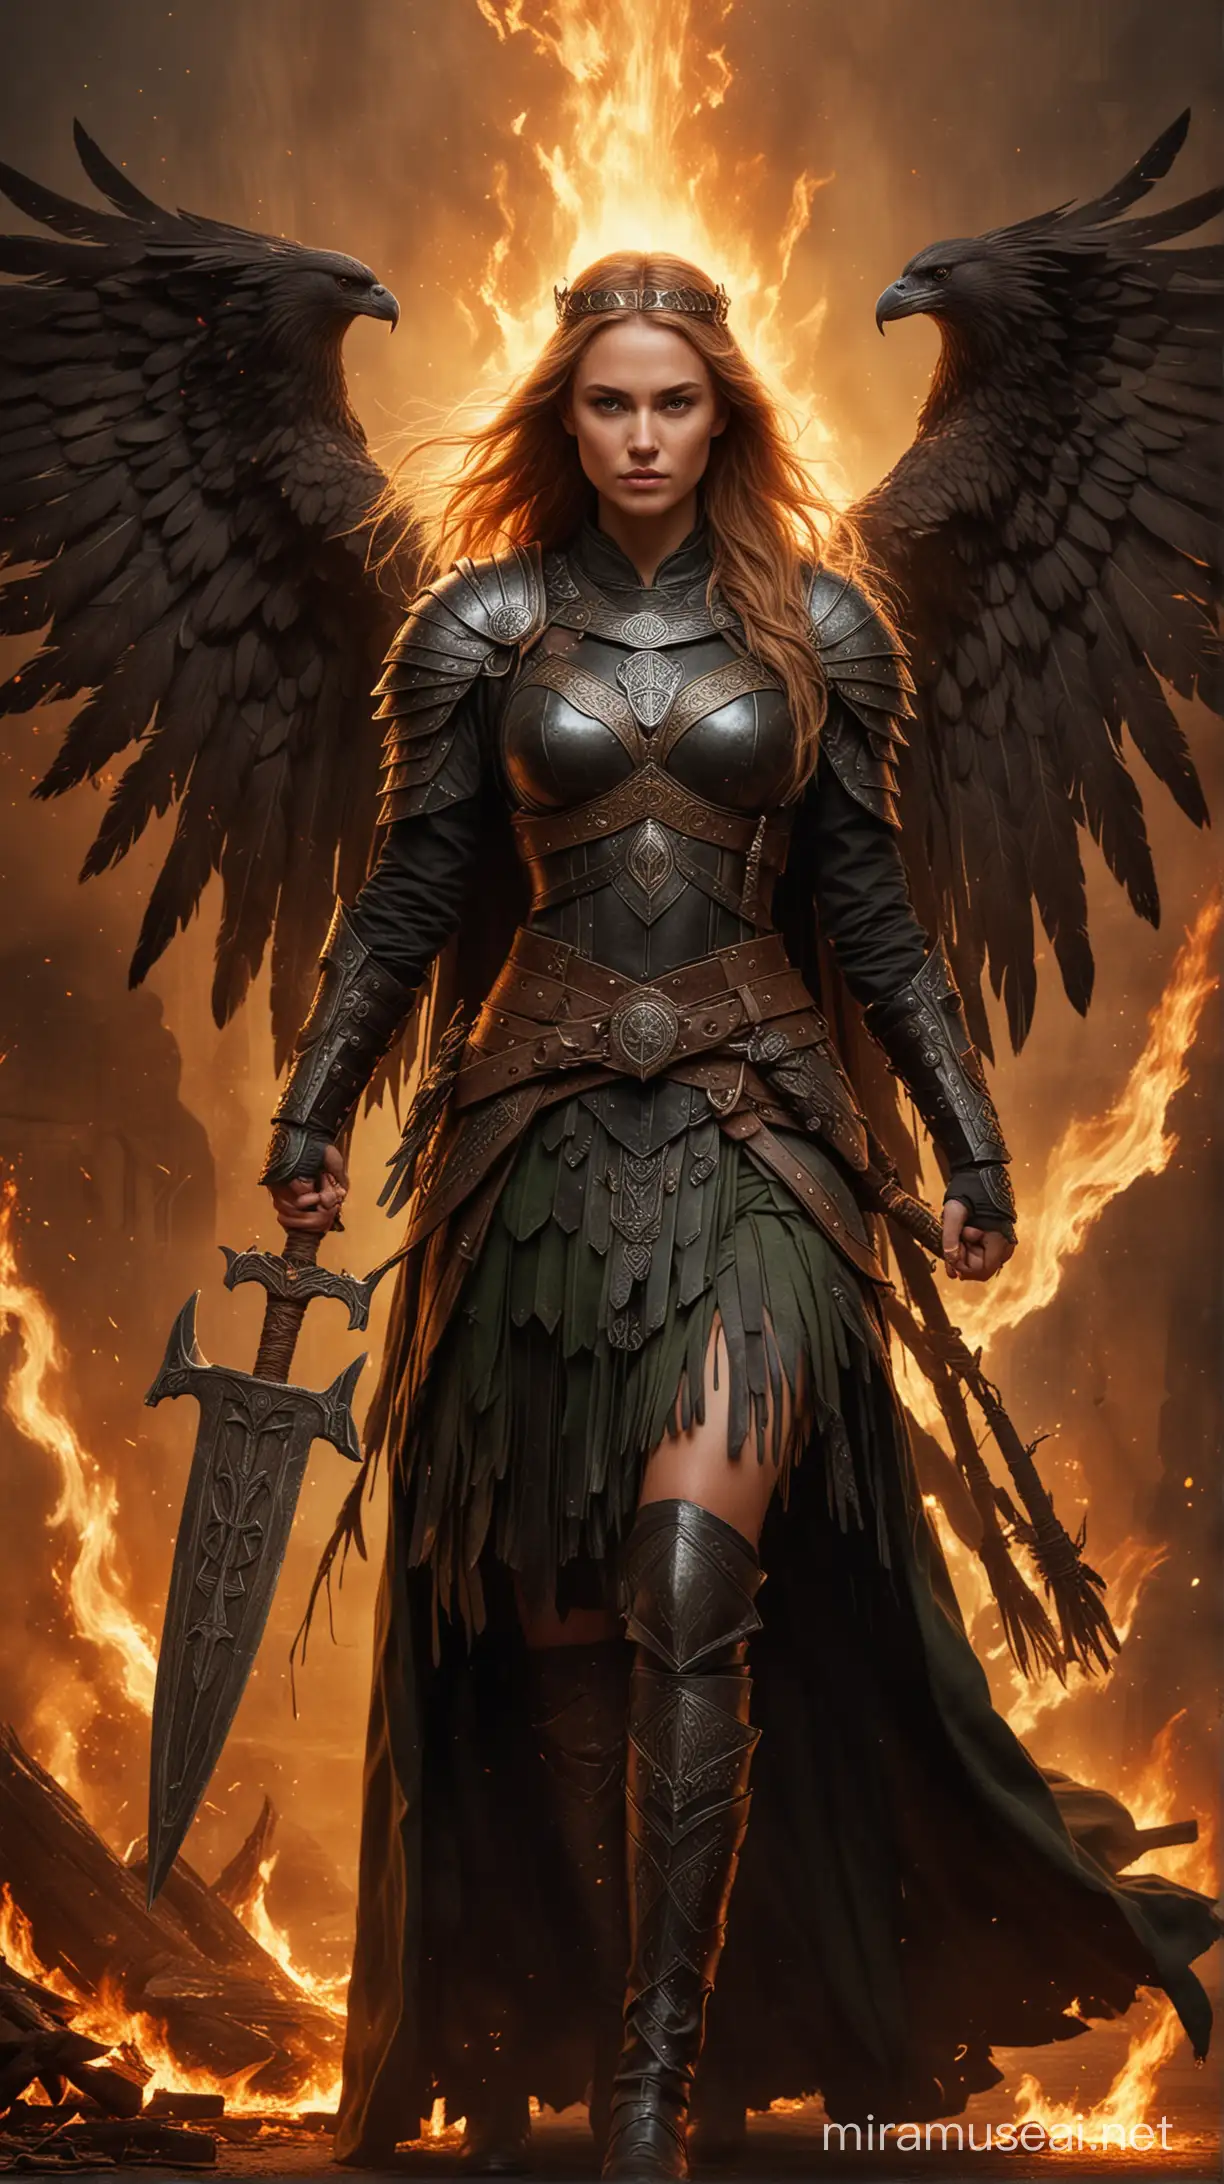 Valkyrie Warrior with Ravenlike Wings and Flaming Shield